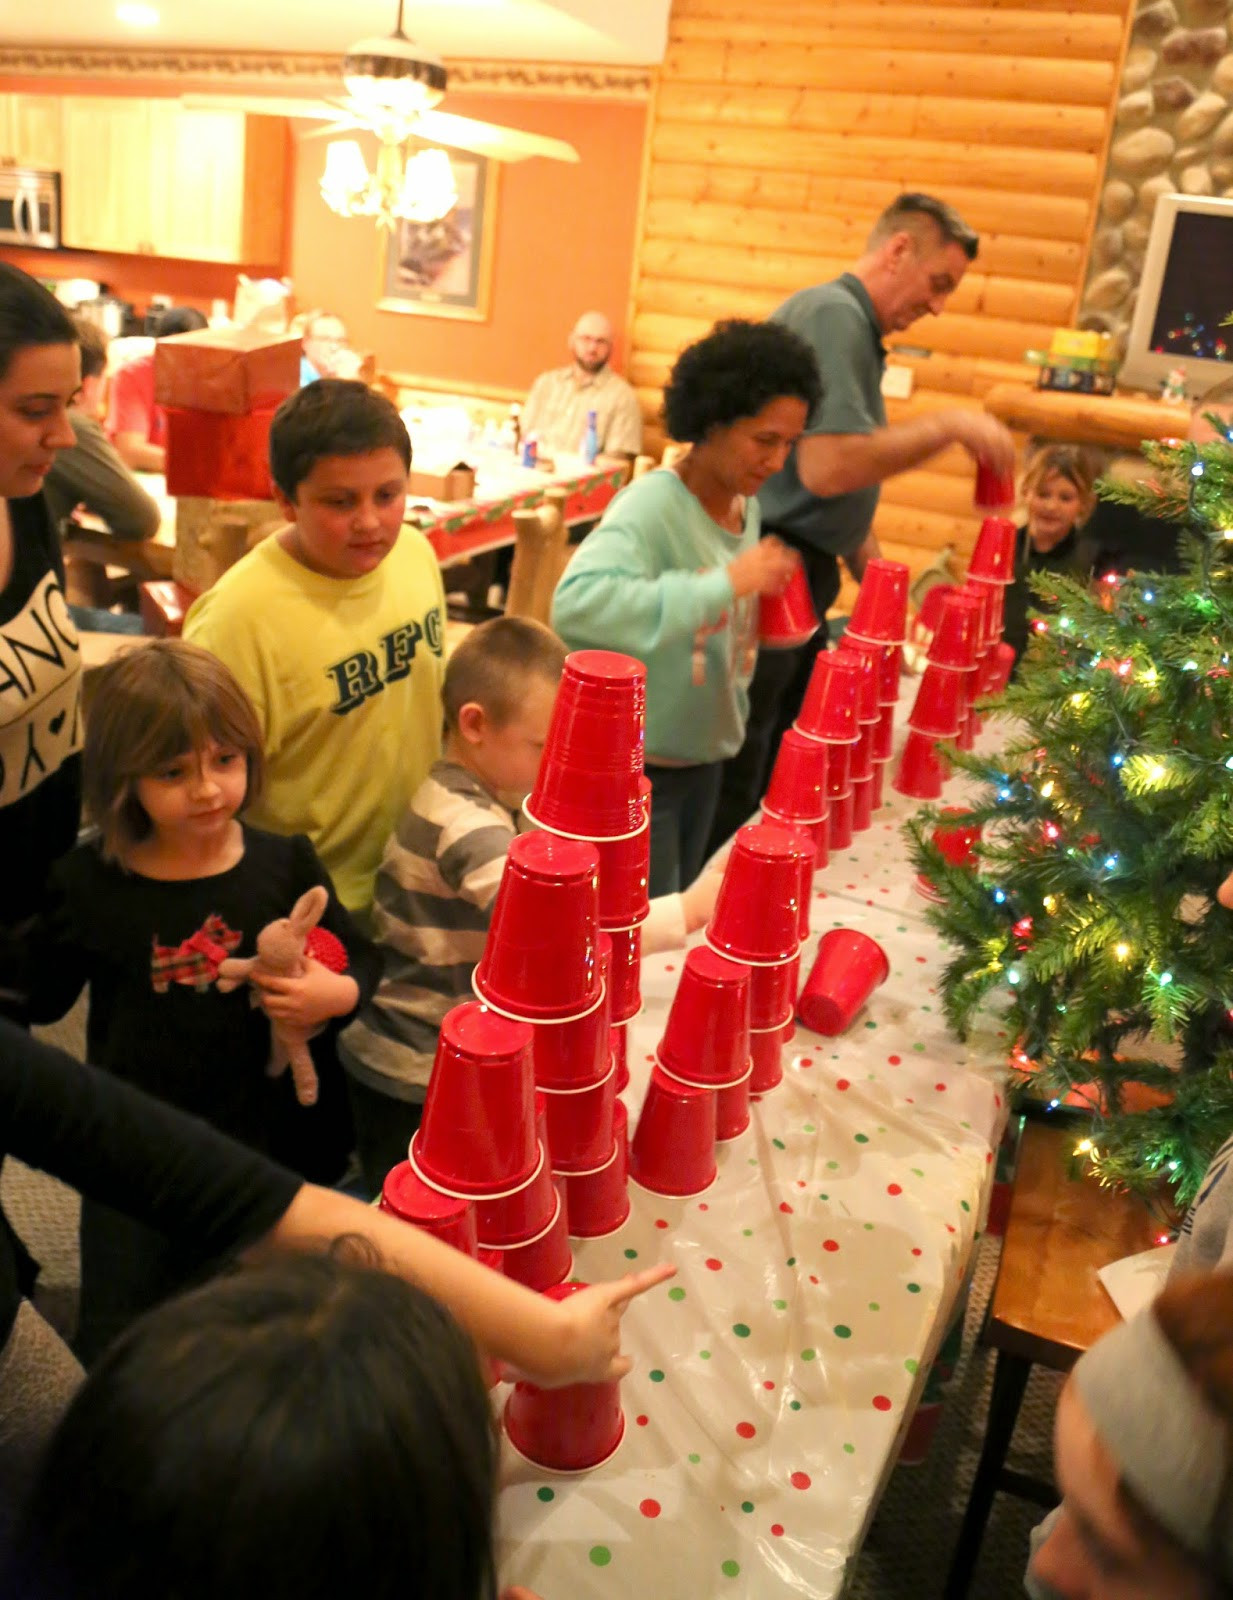 Family Christmas Party Ideas
 Notable Nest Fun Family Christmas Party Games to Try